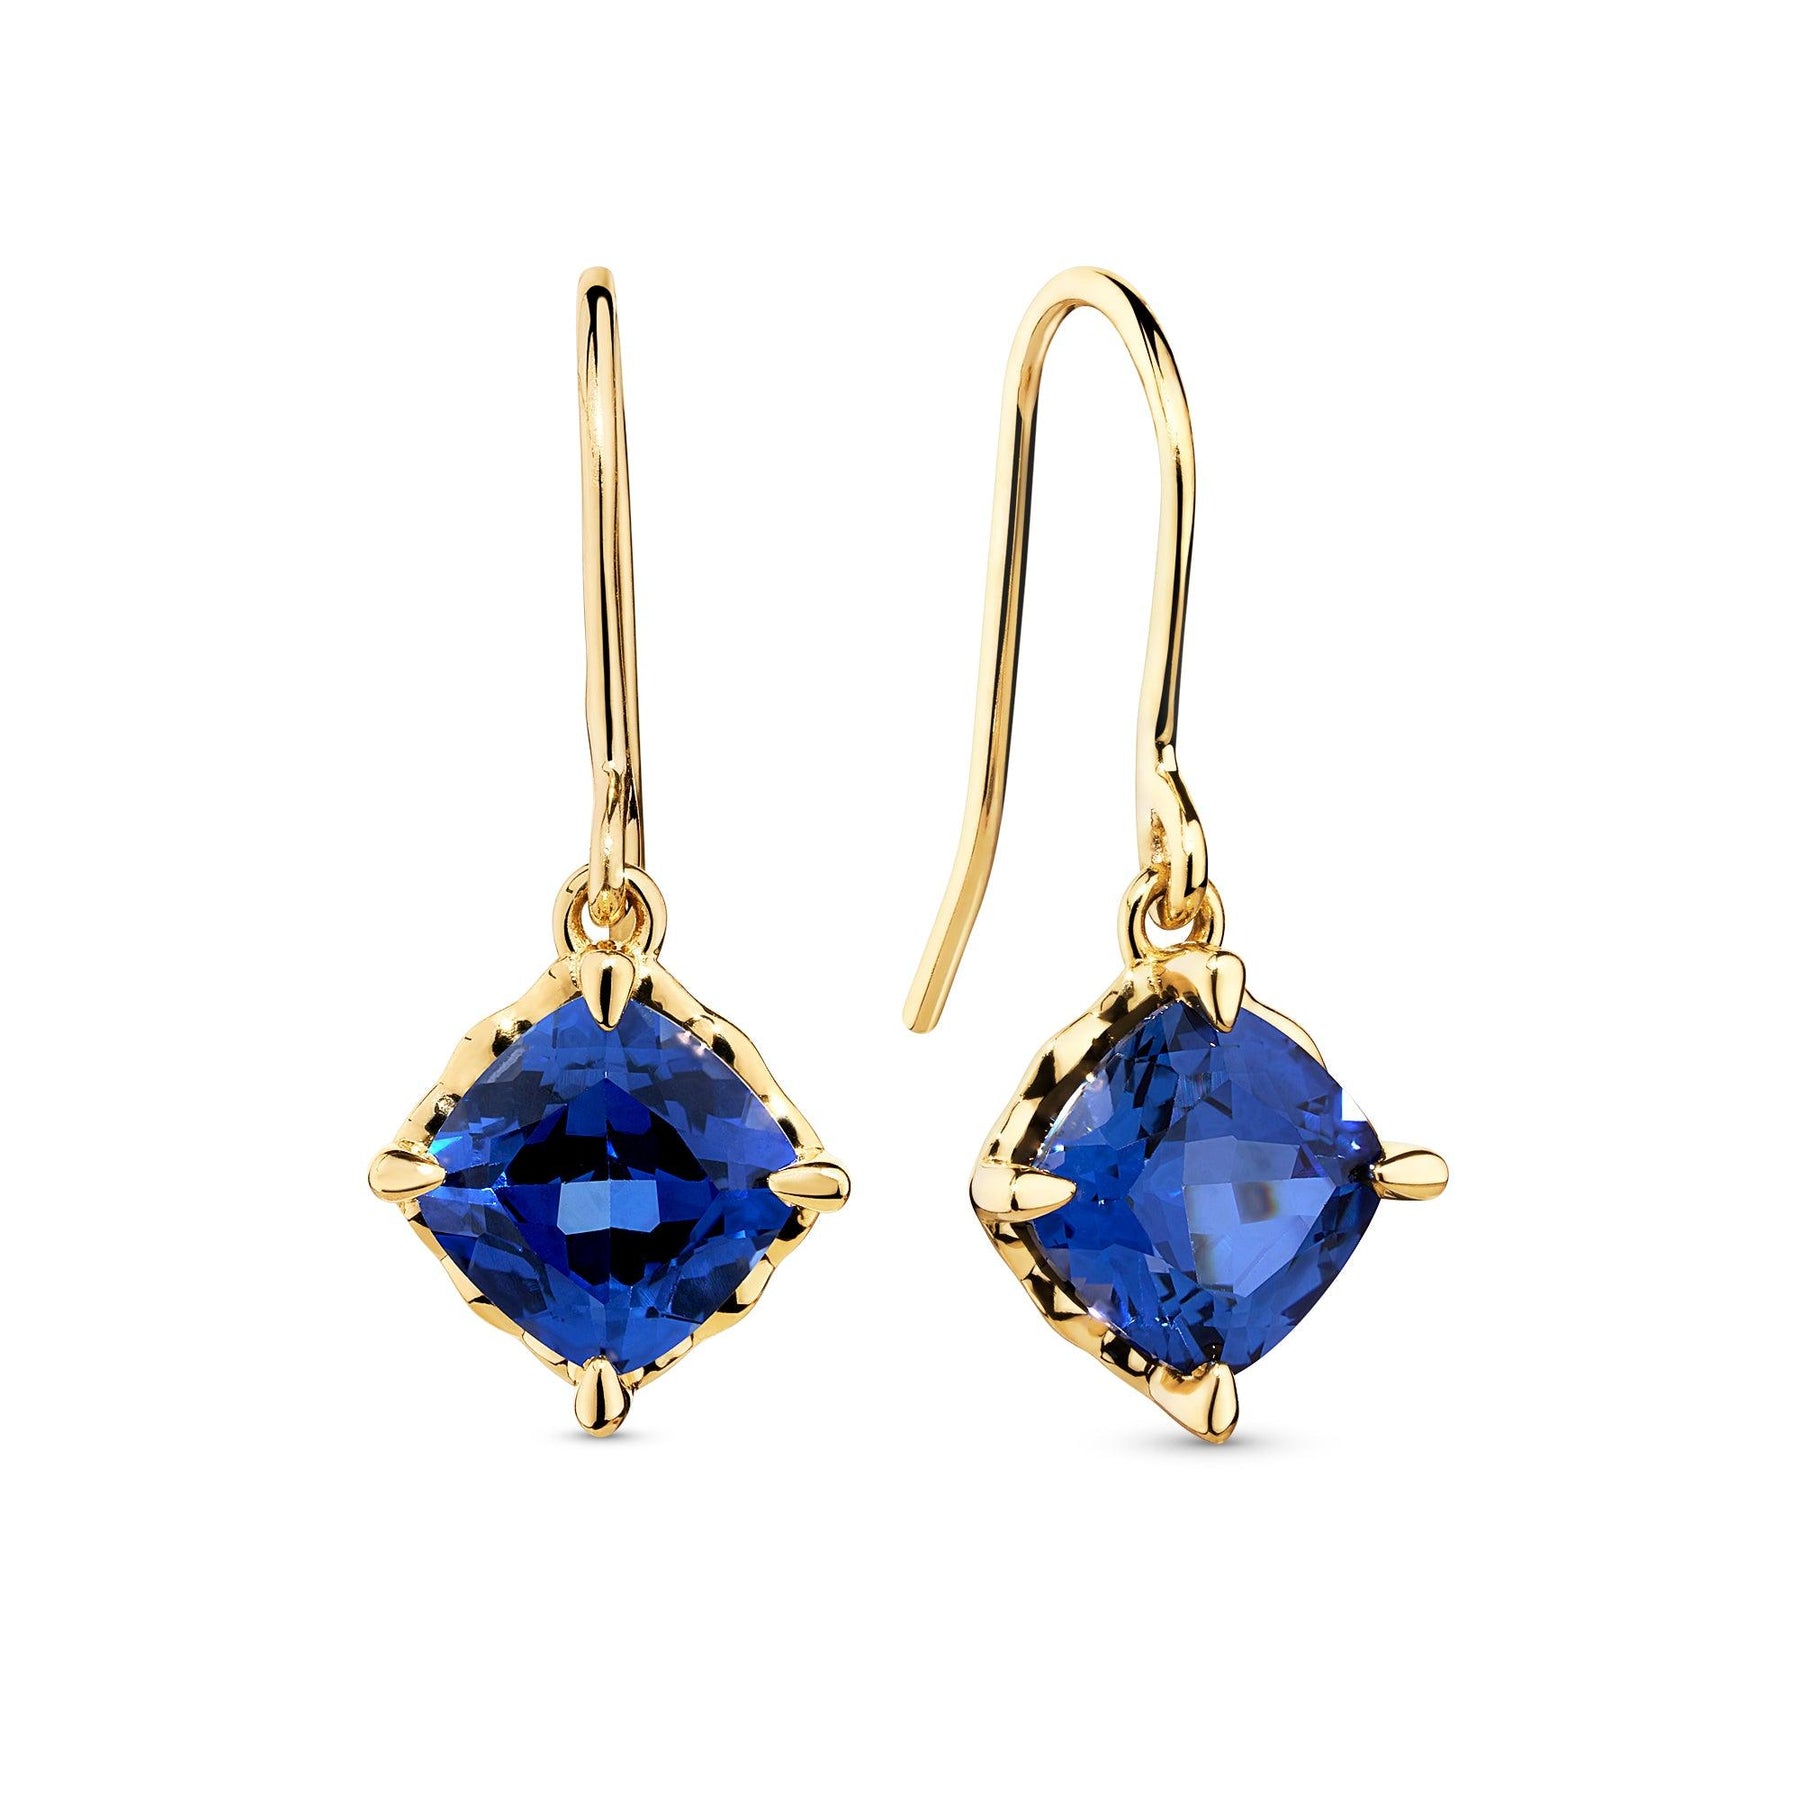 Vintage Drop Diamond and Blue Sapphire Earrings 14k White Gold 0.89ct - RE29